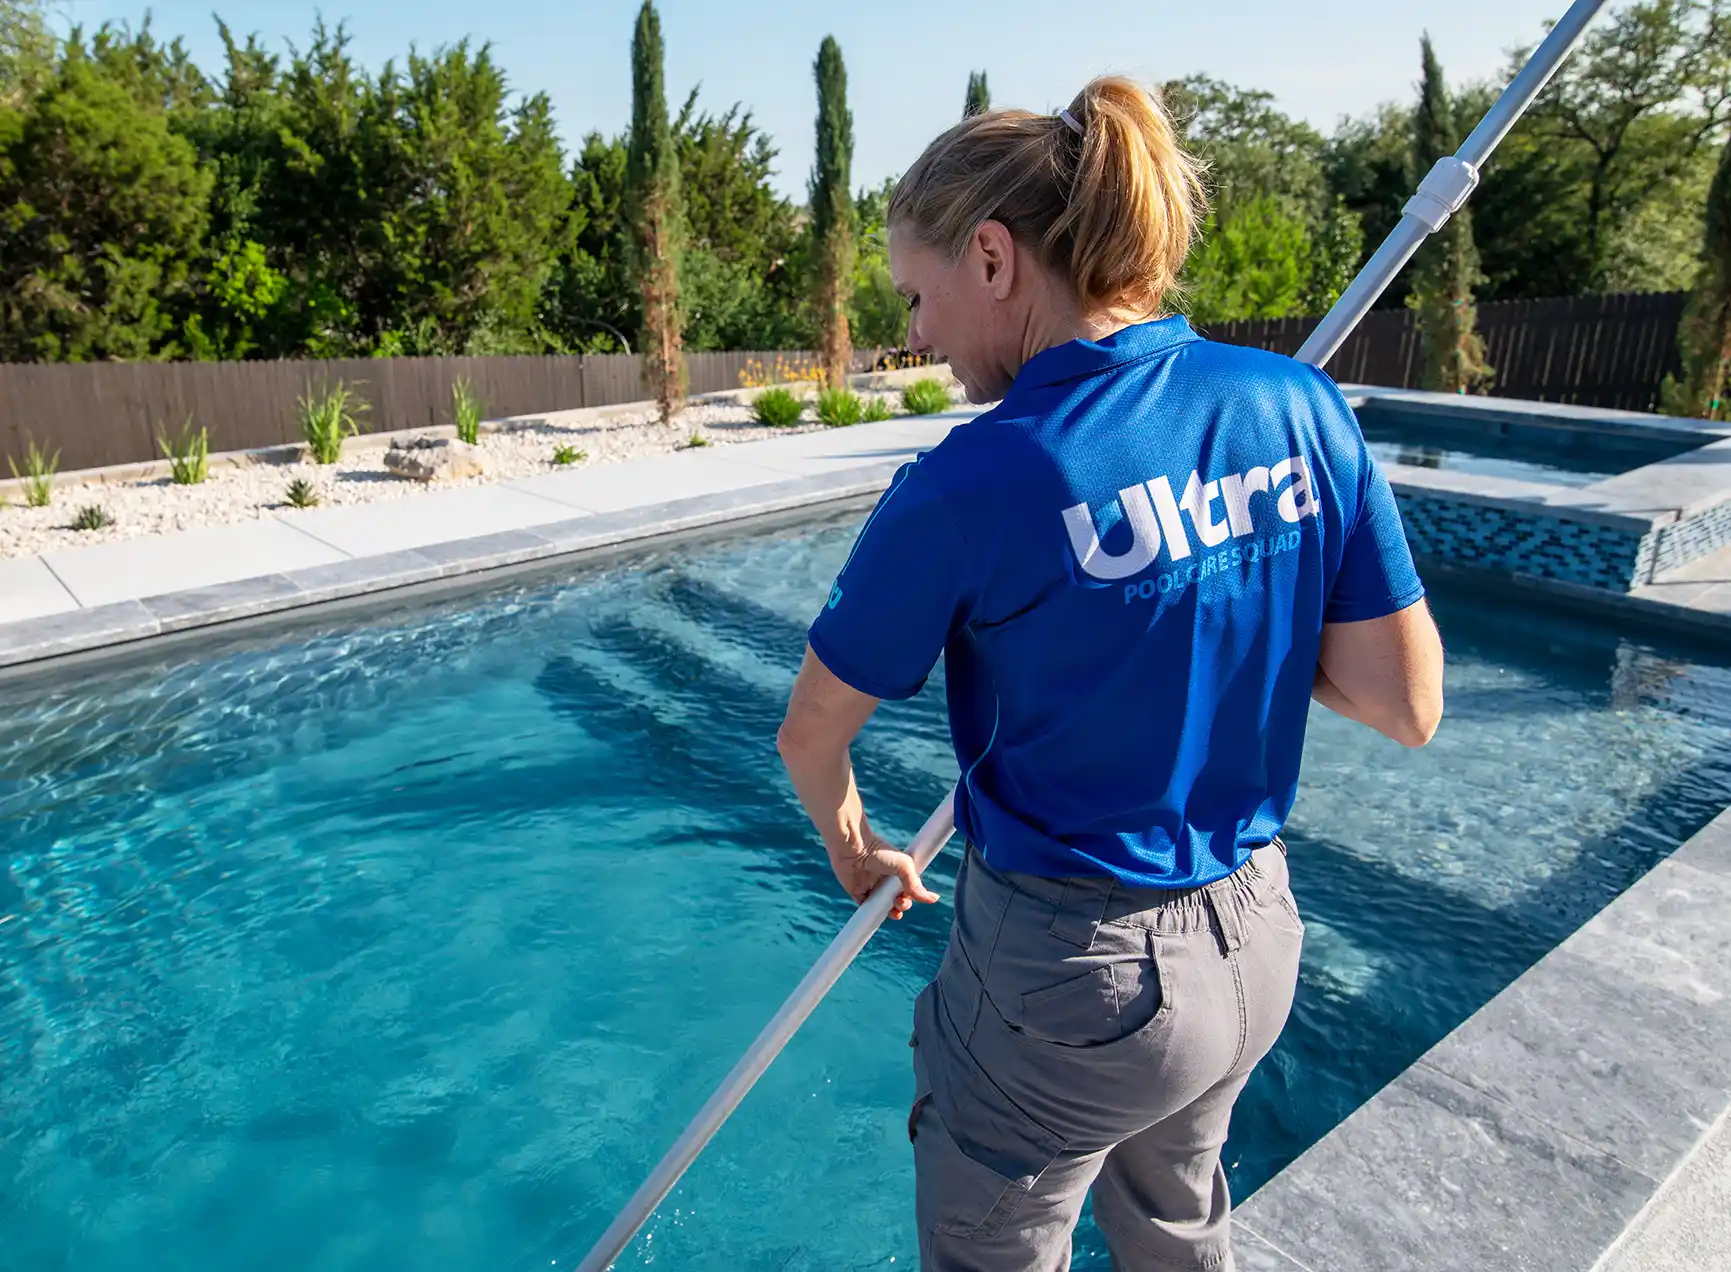 Advantages of a pool franchise for working moms